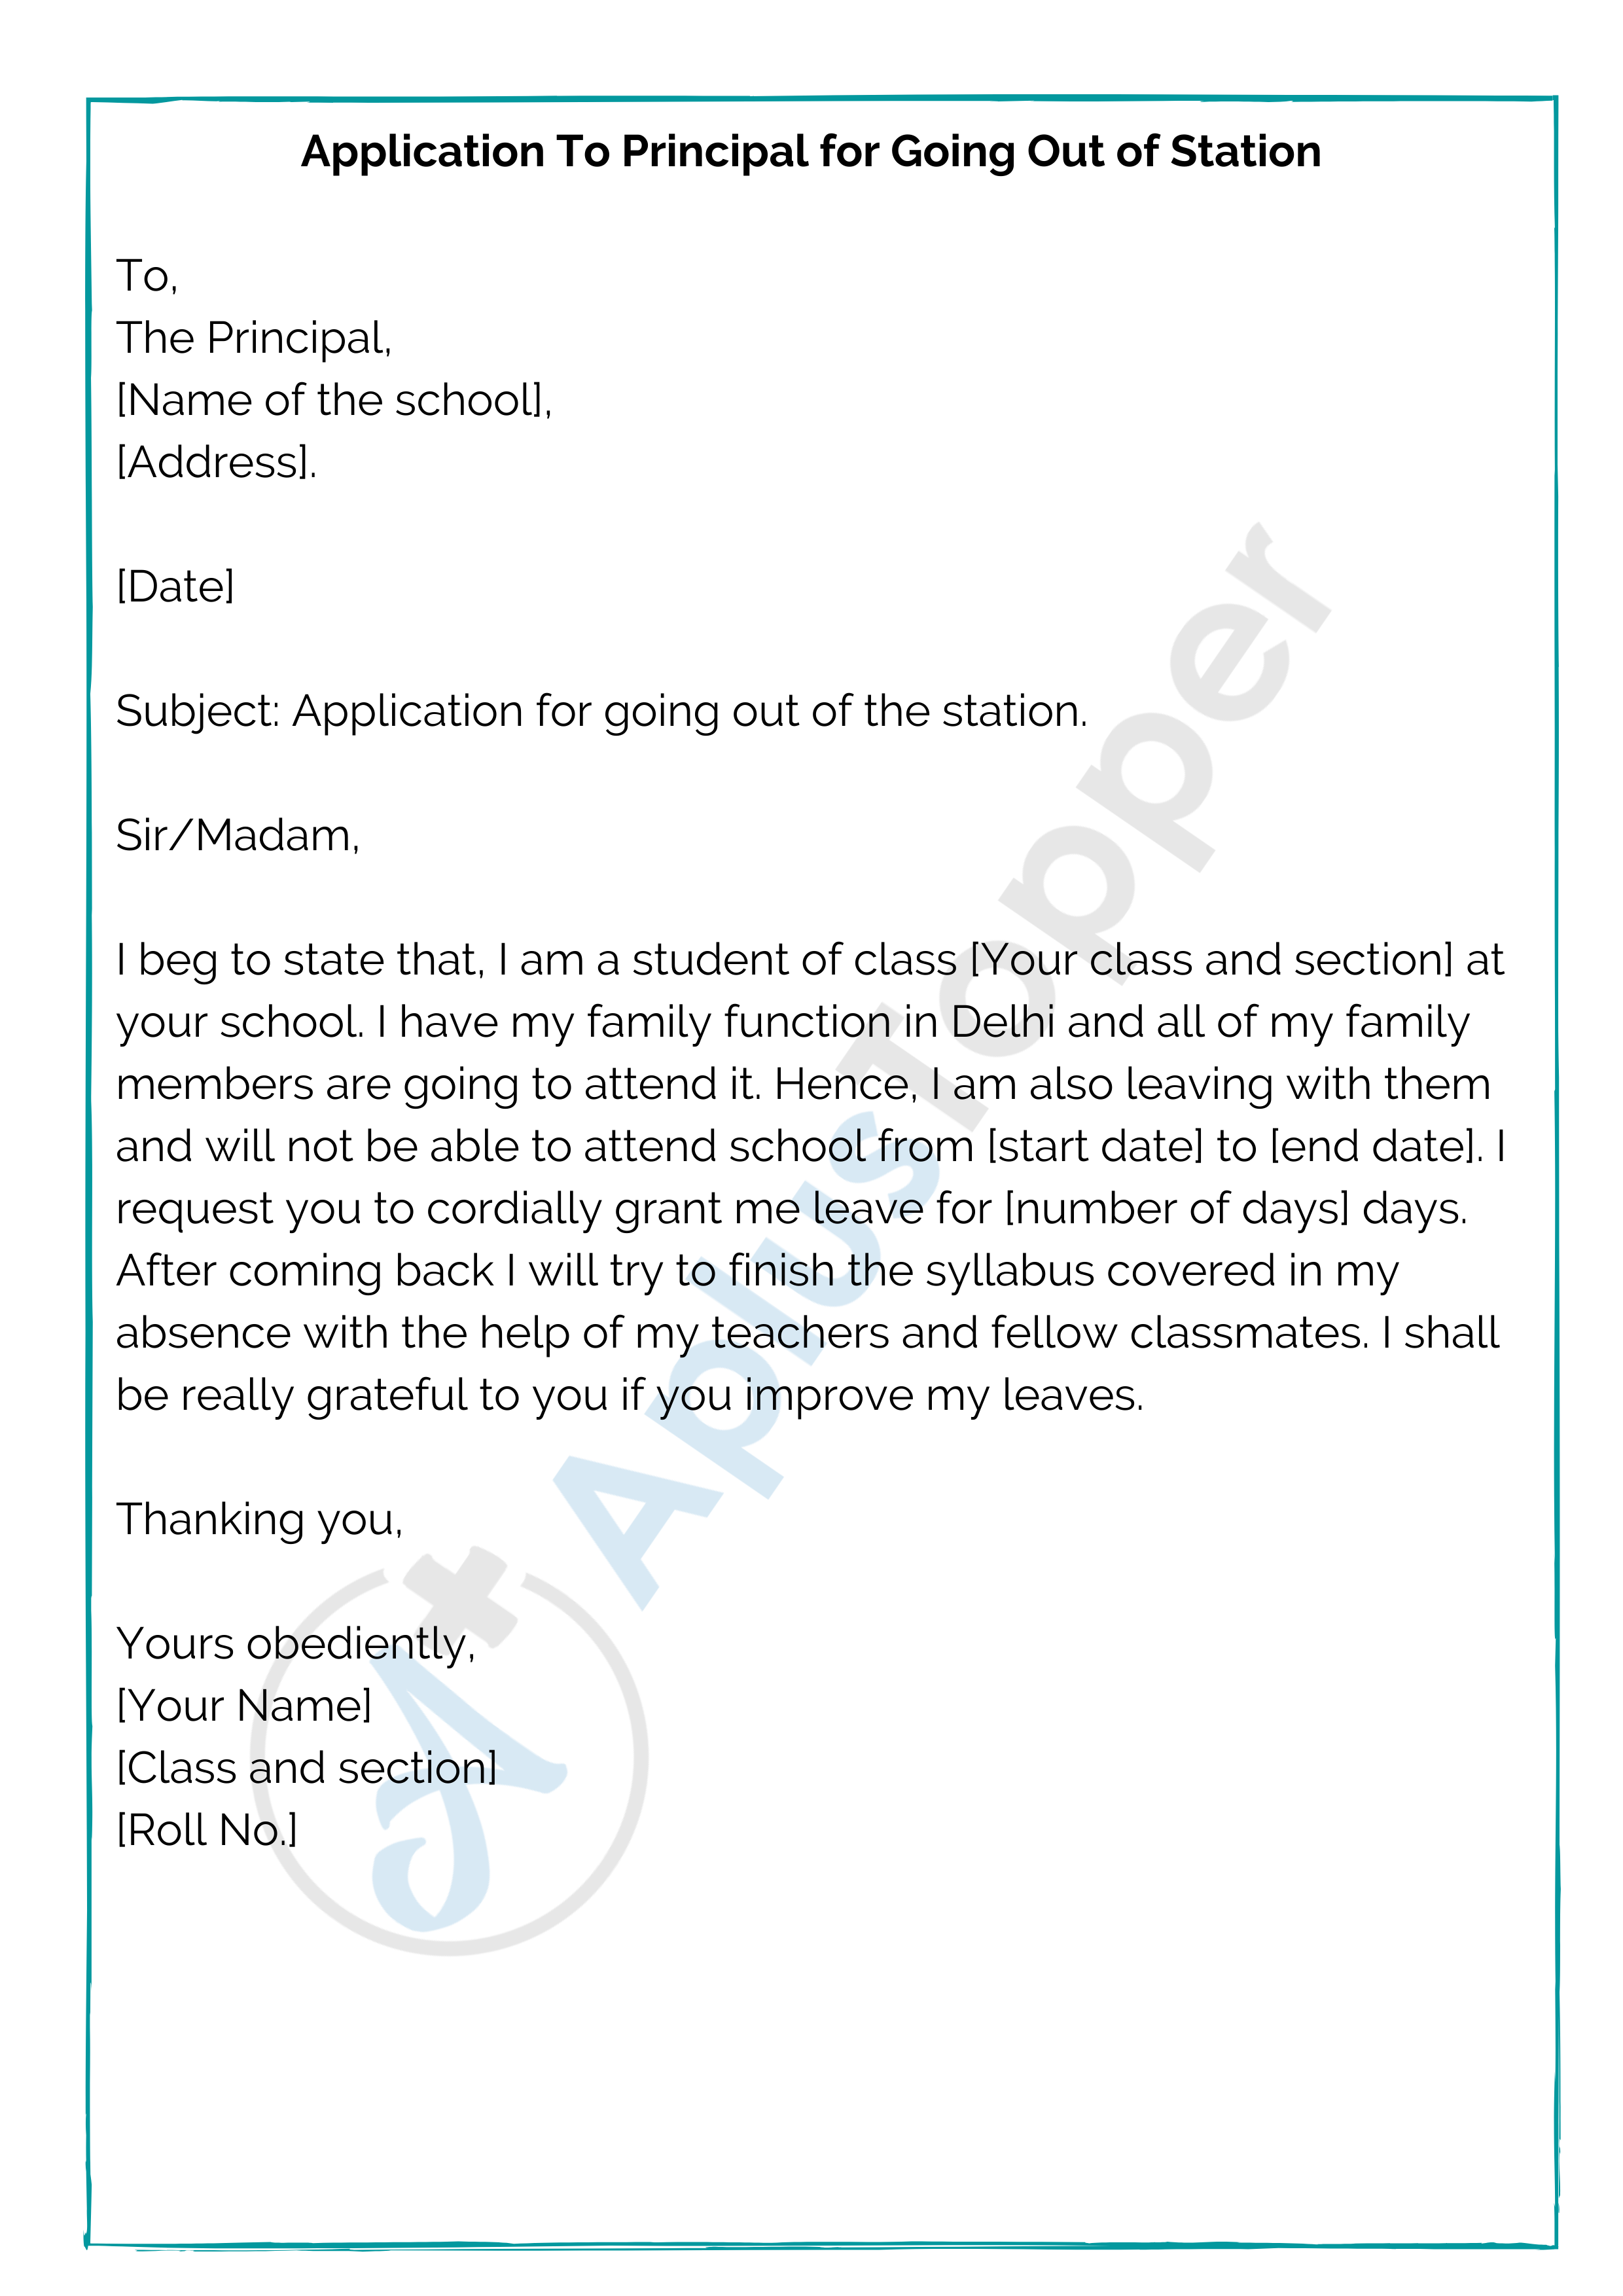 Application To Principal for Going Out of Station